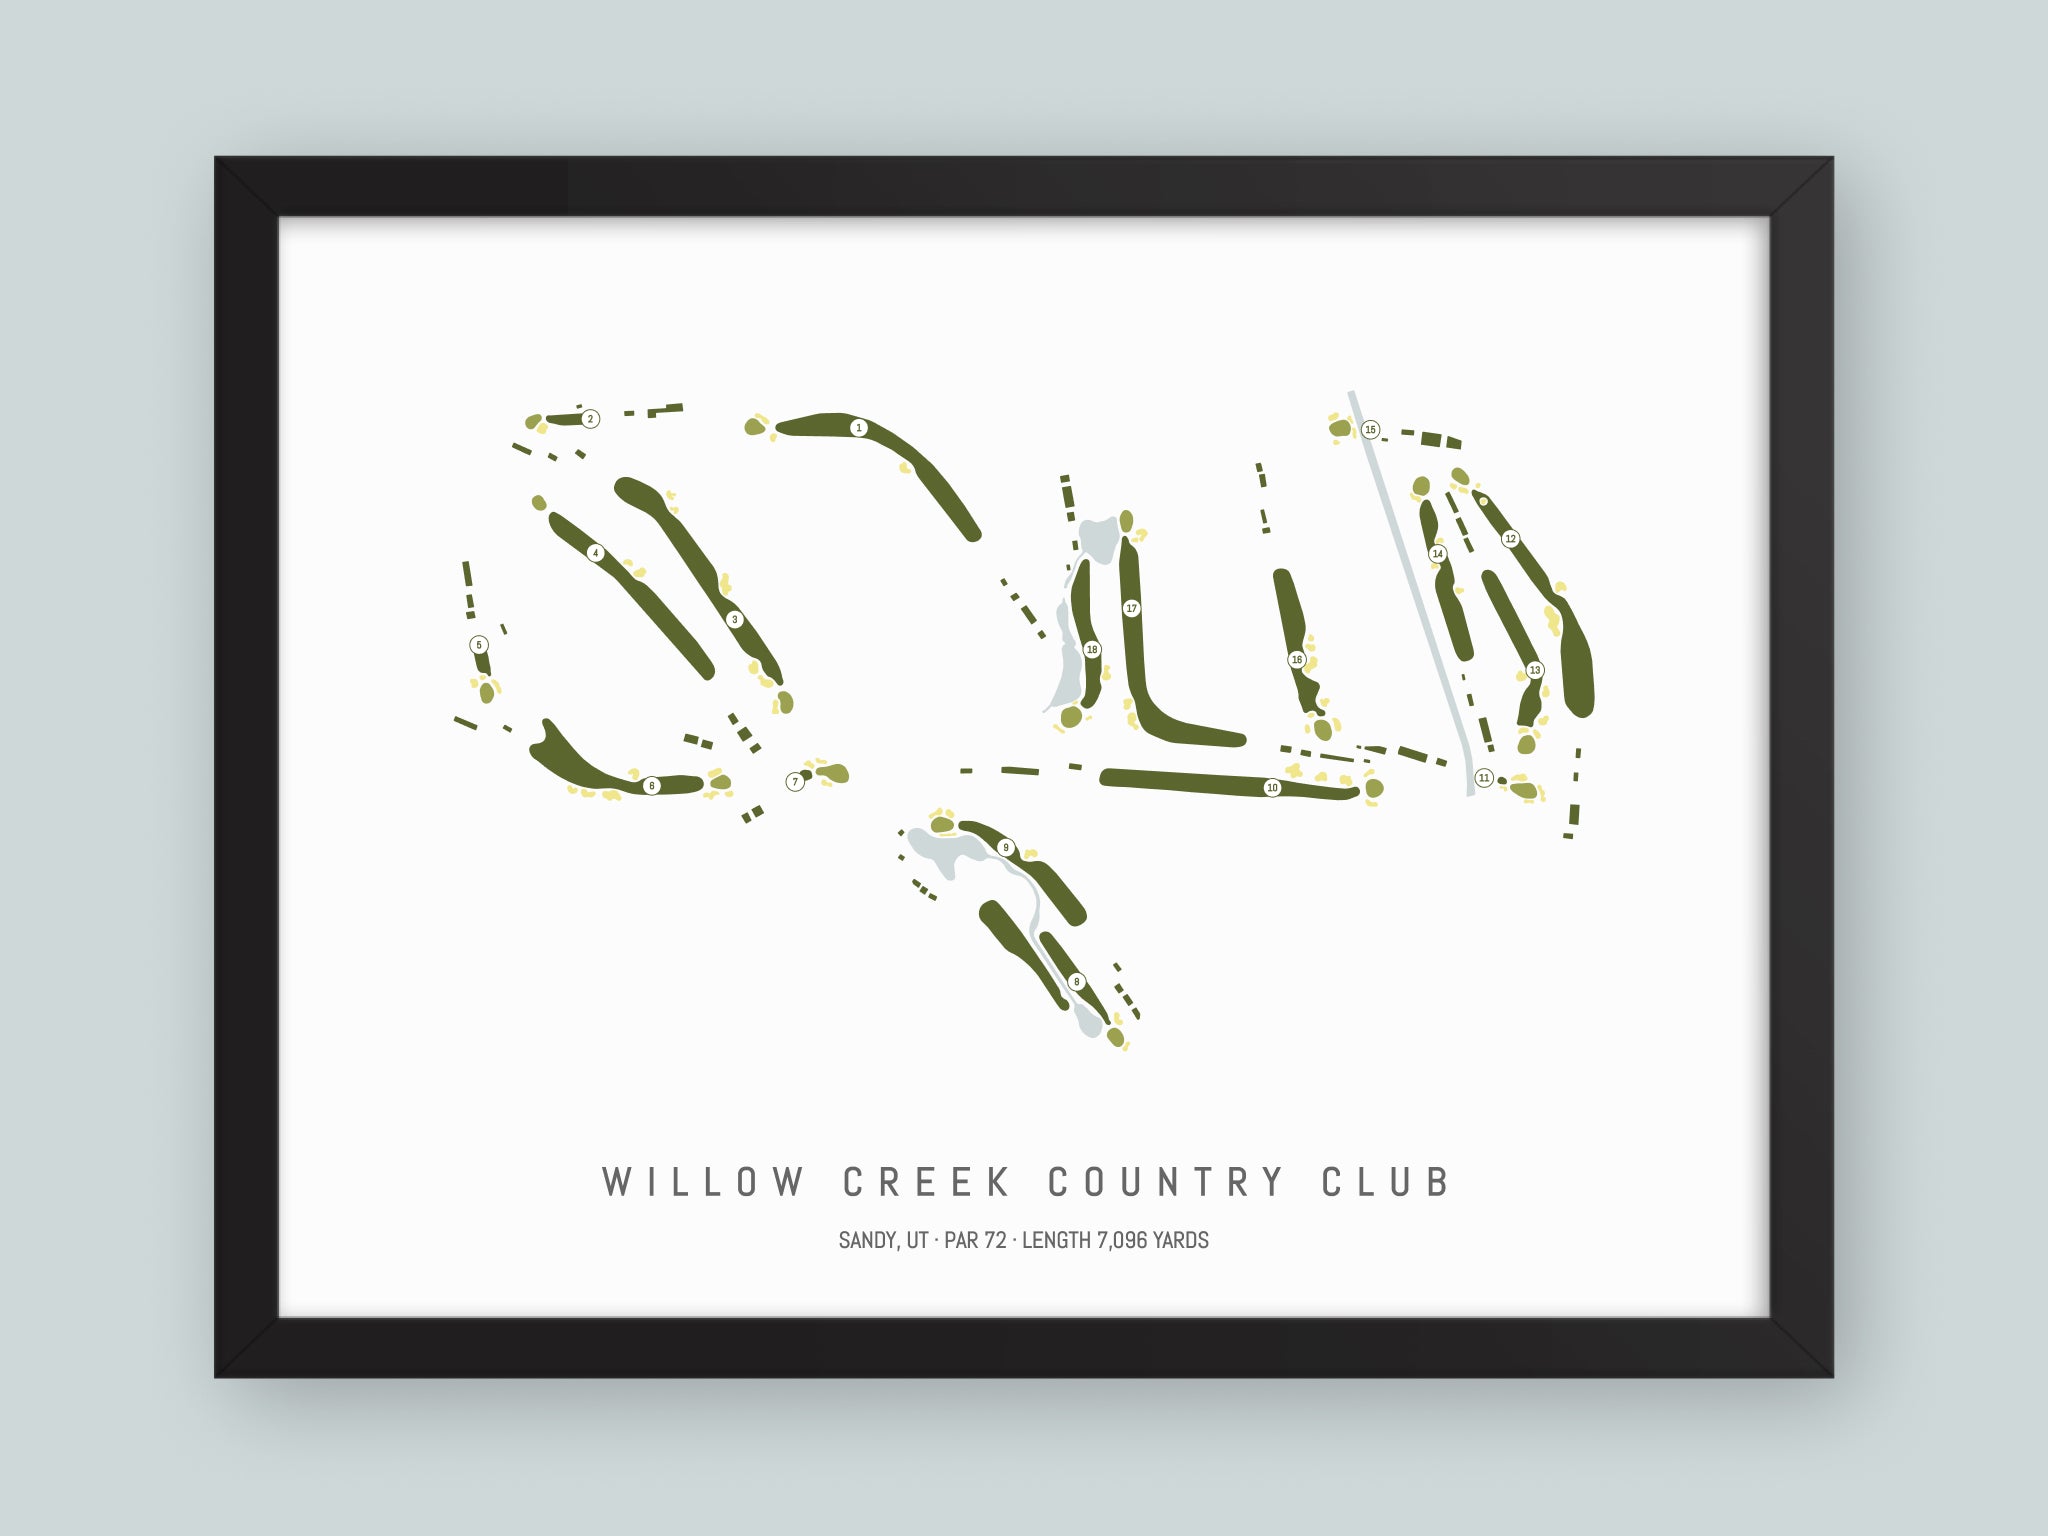 Willow-Creek-Country-Club-UT--Black-Frame-24x18-With-Hole-Numbers